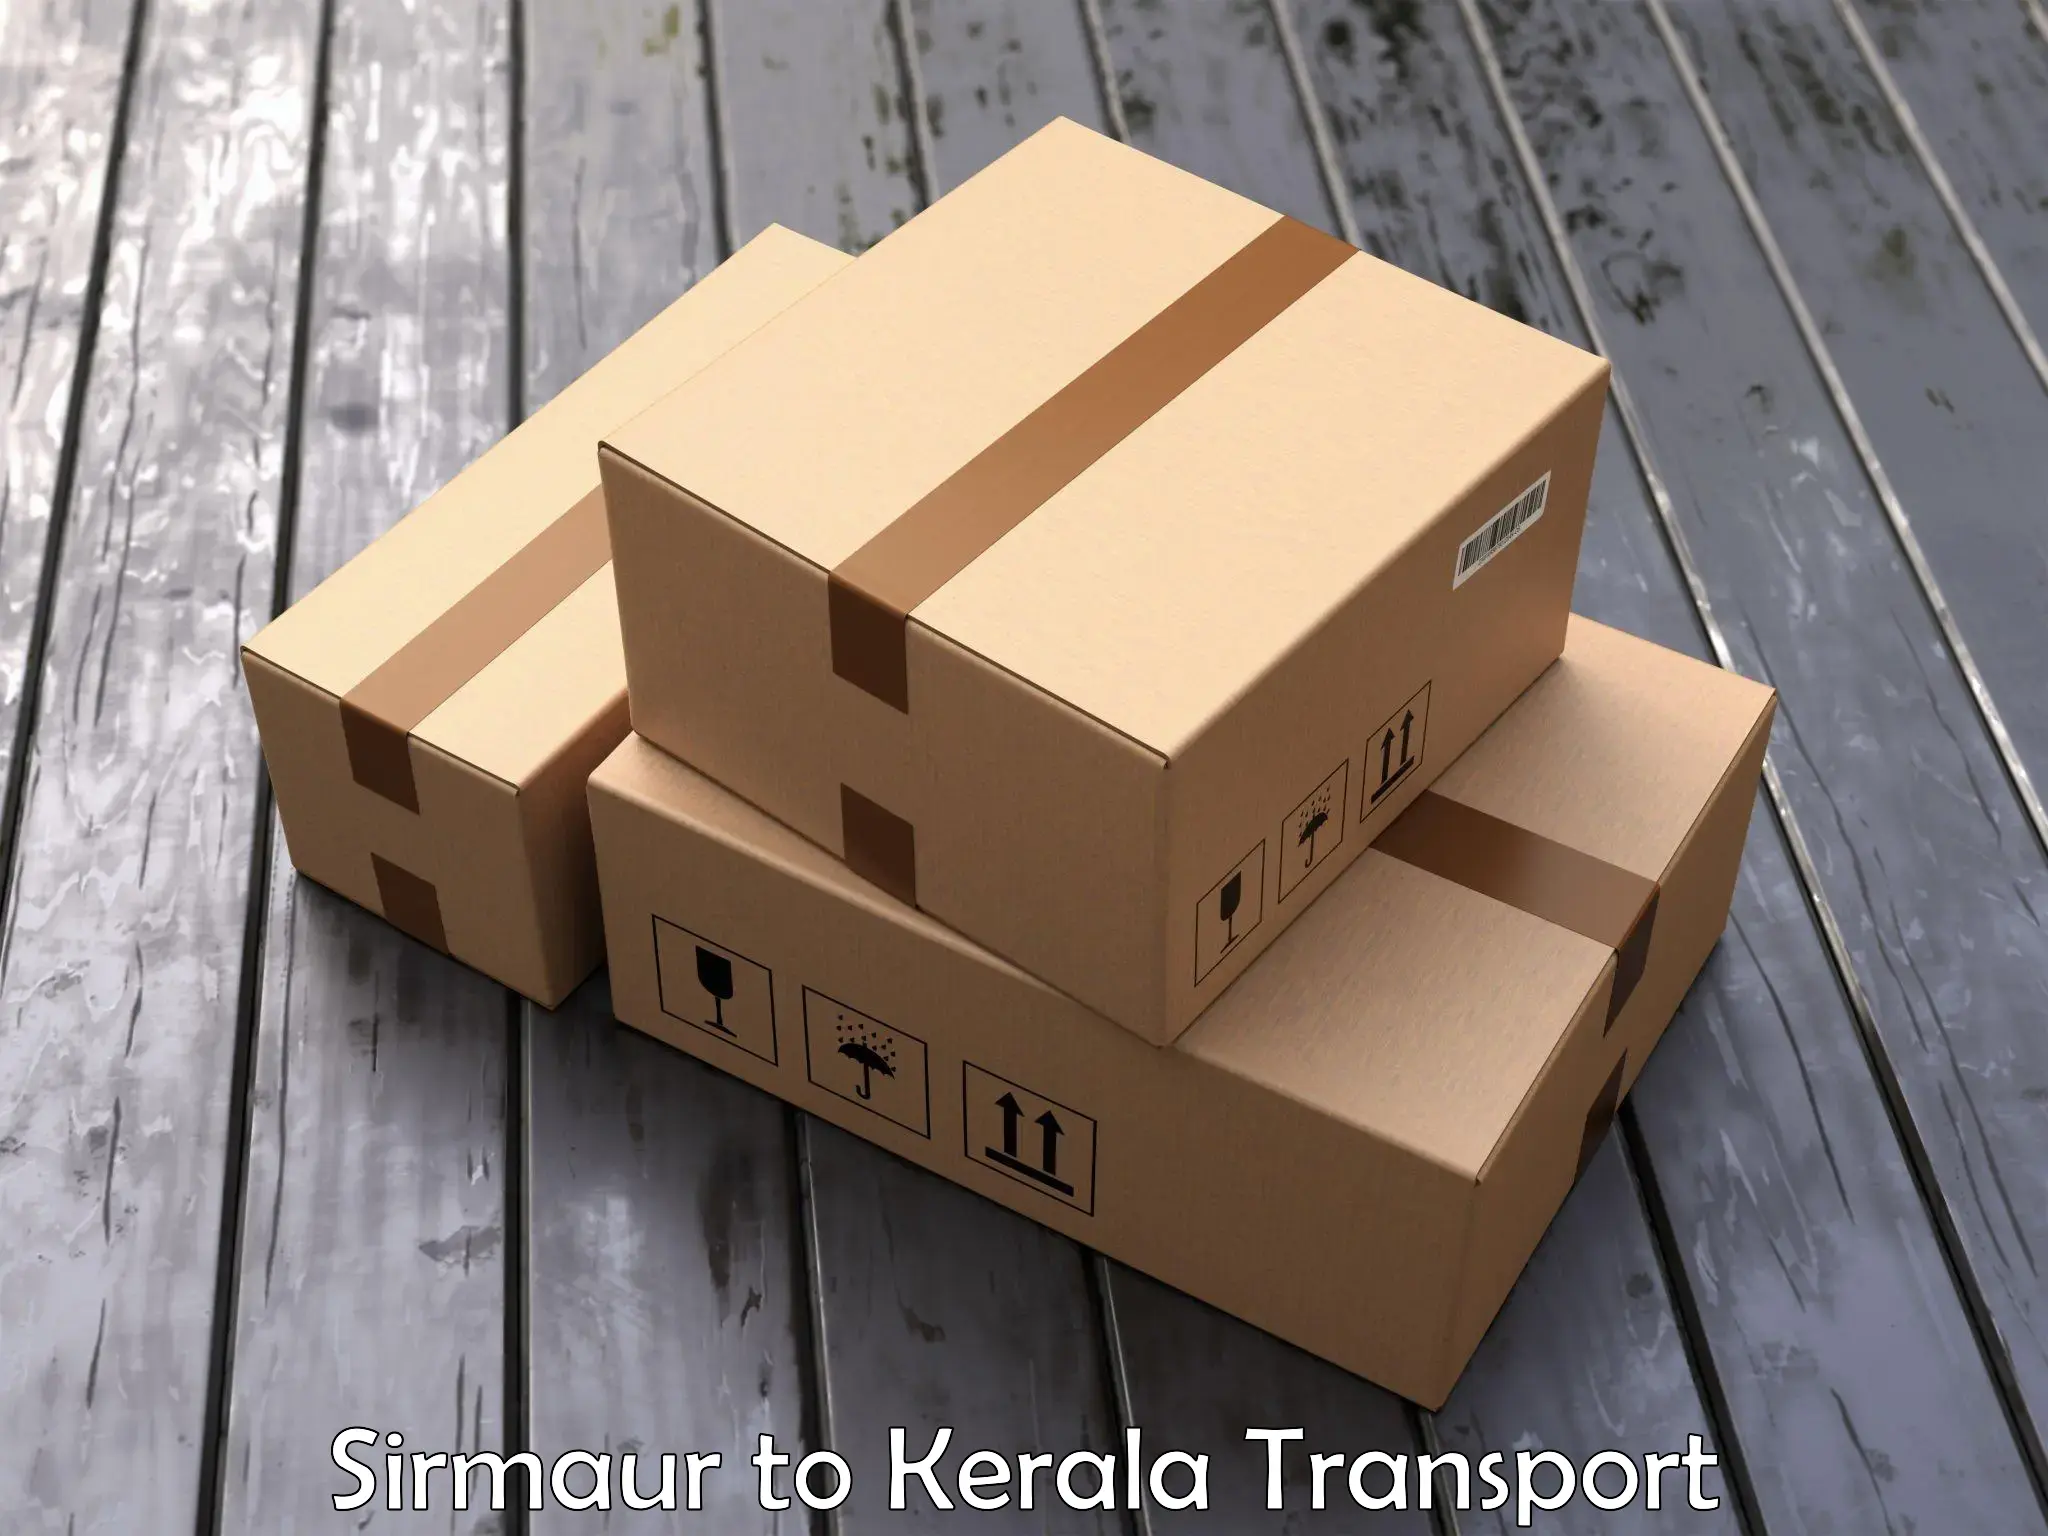 Road transport online services Sirmaur to Kochi